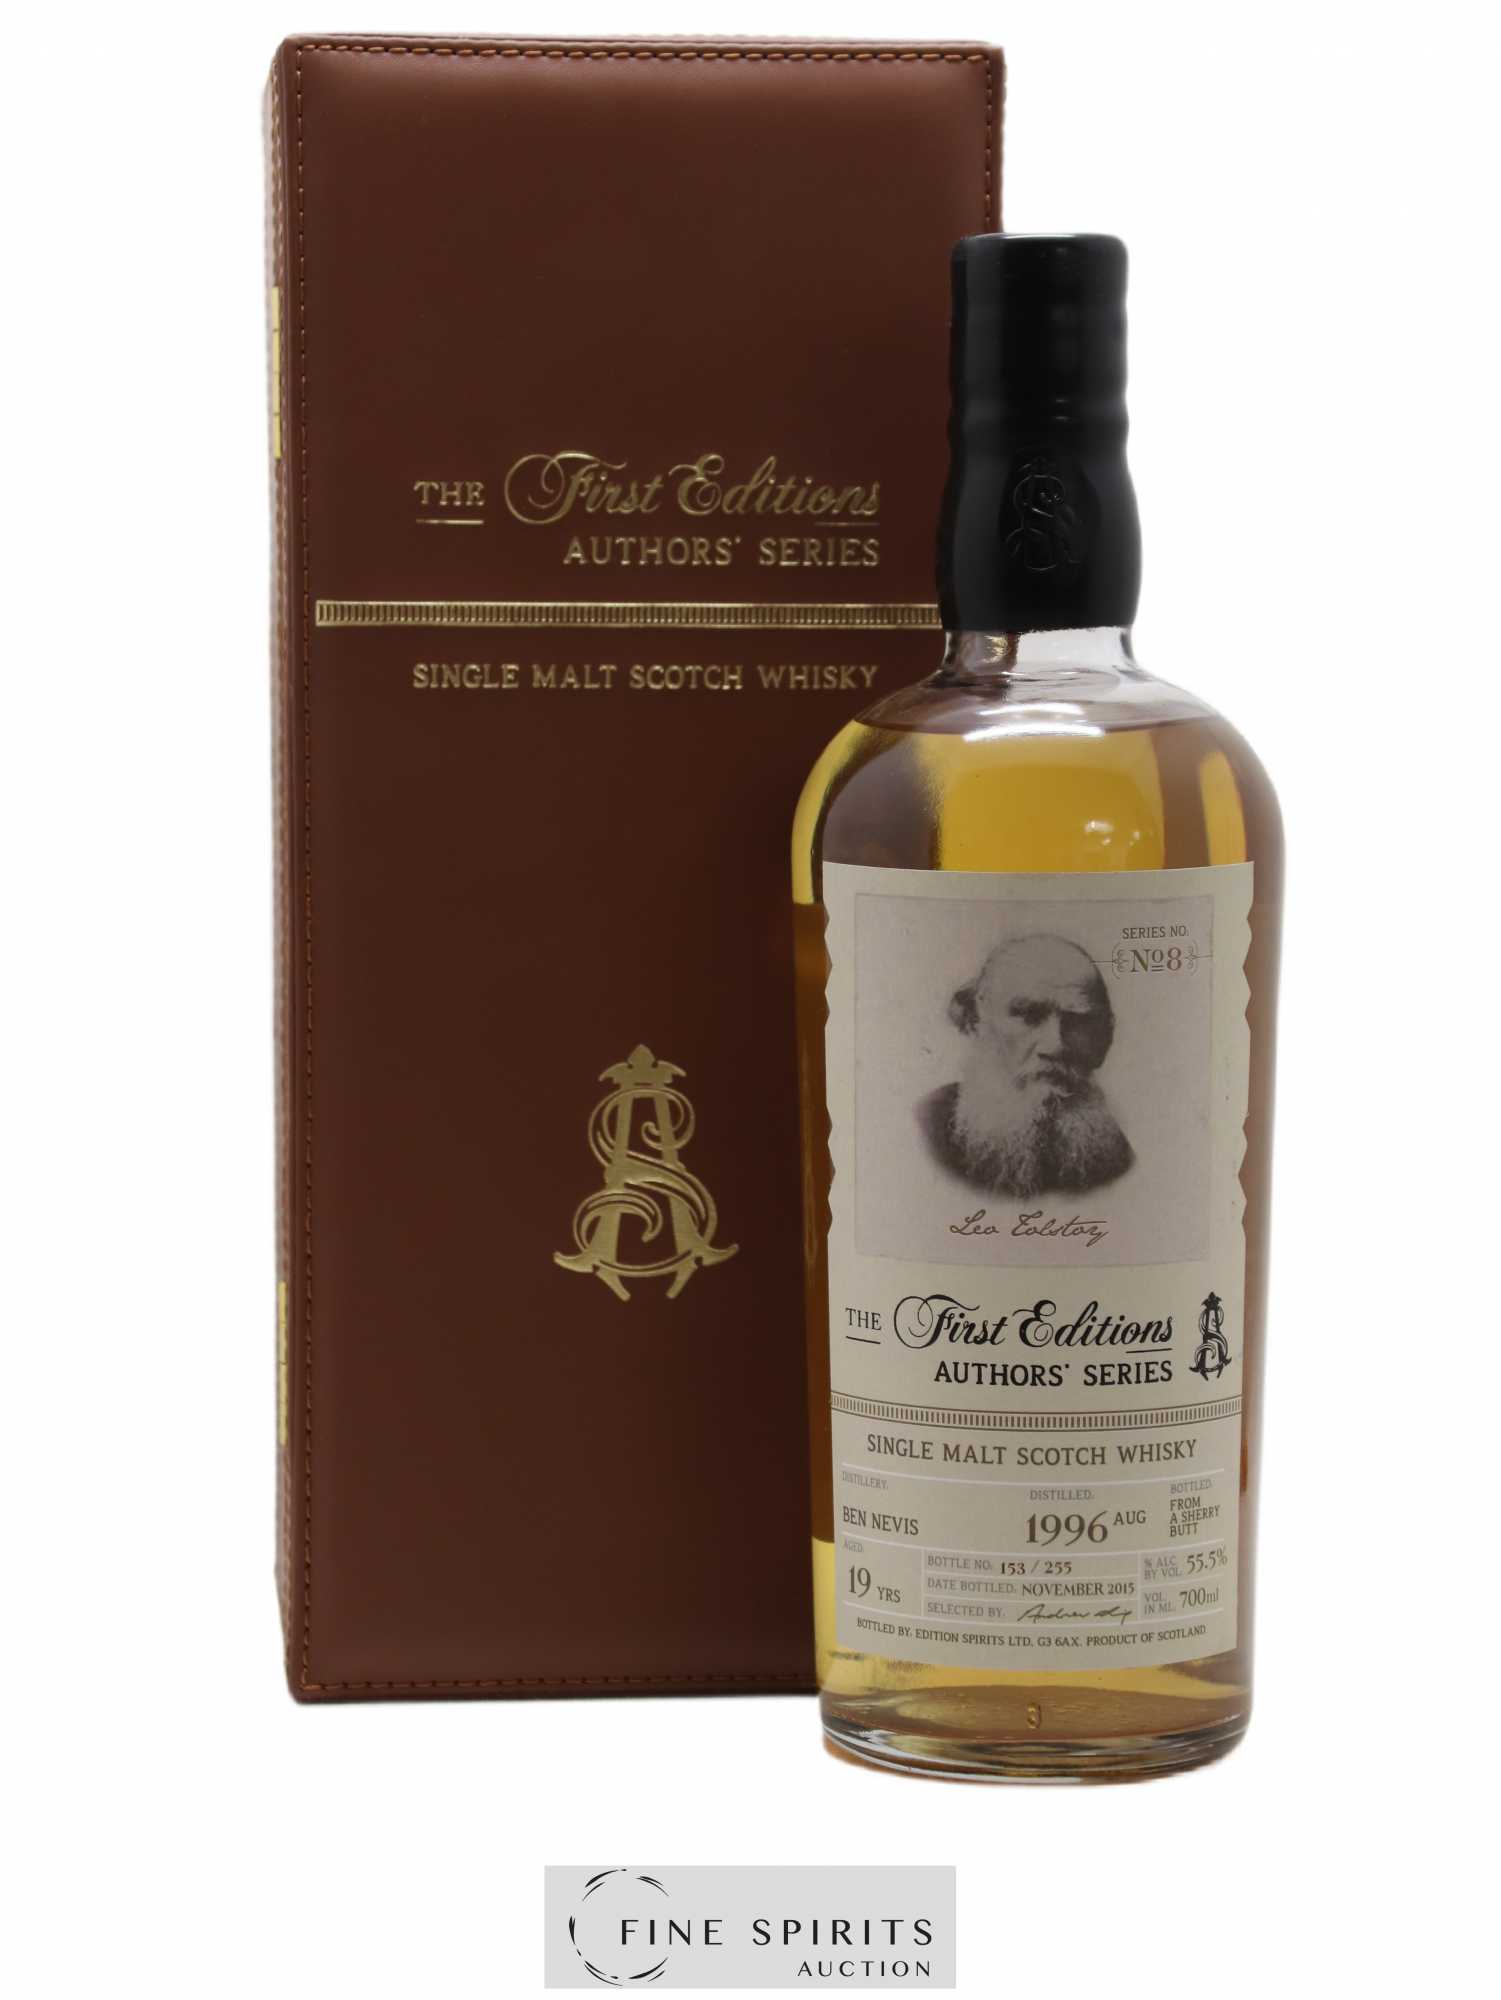 Ben Nevis 19 years 1996 Edition Spirits Author's Series n°8 Sherry Butt Cask - One of 255 - bottled 2015 The First Editions 